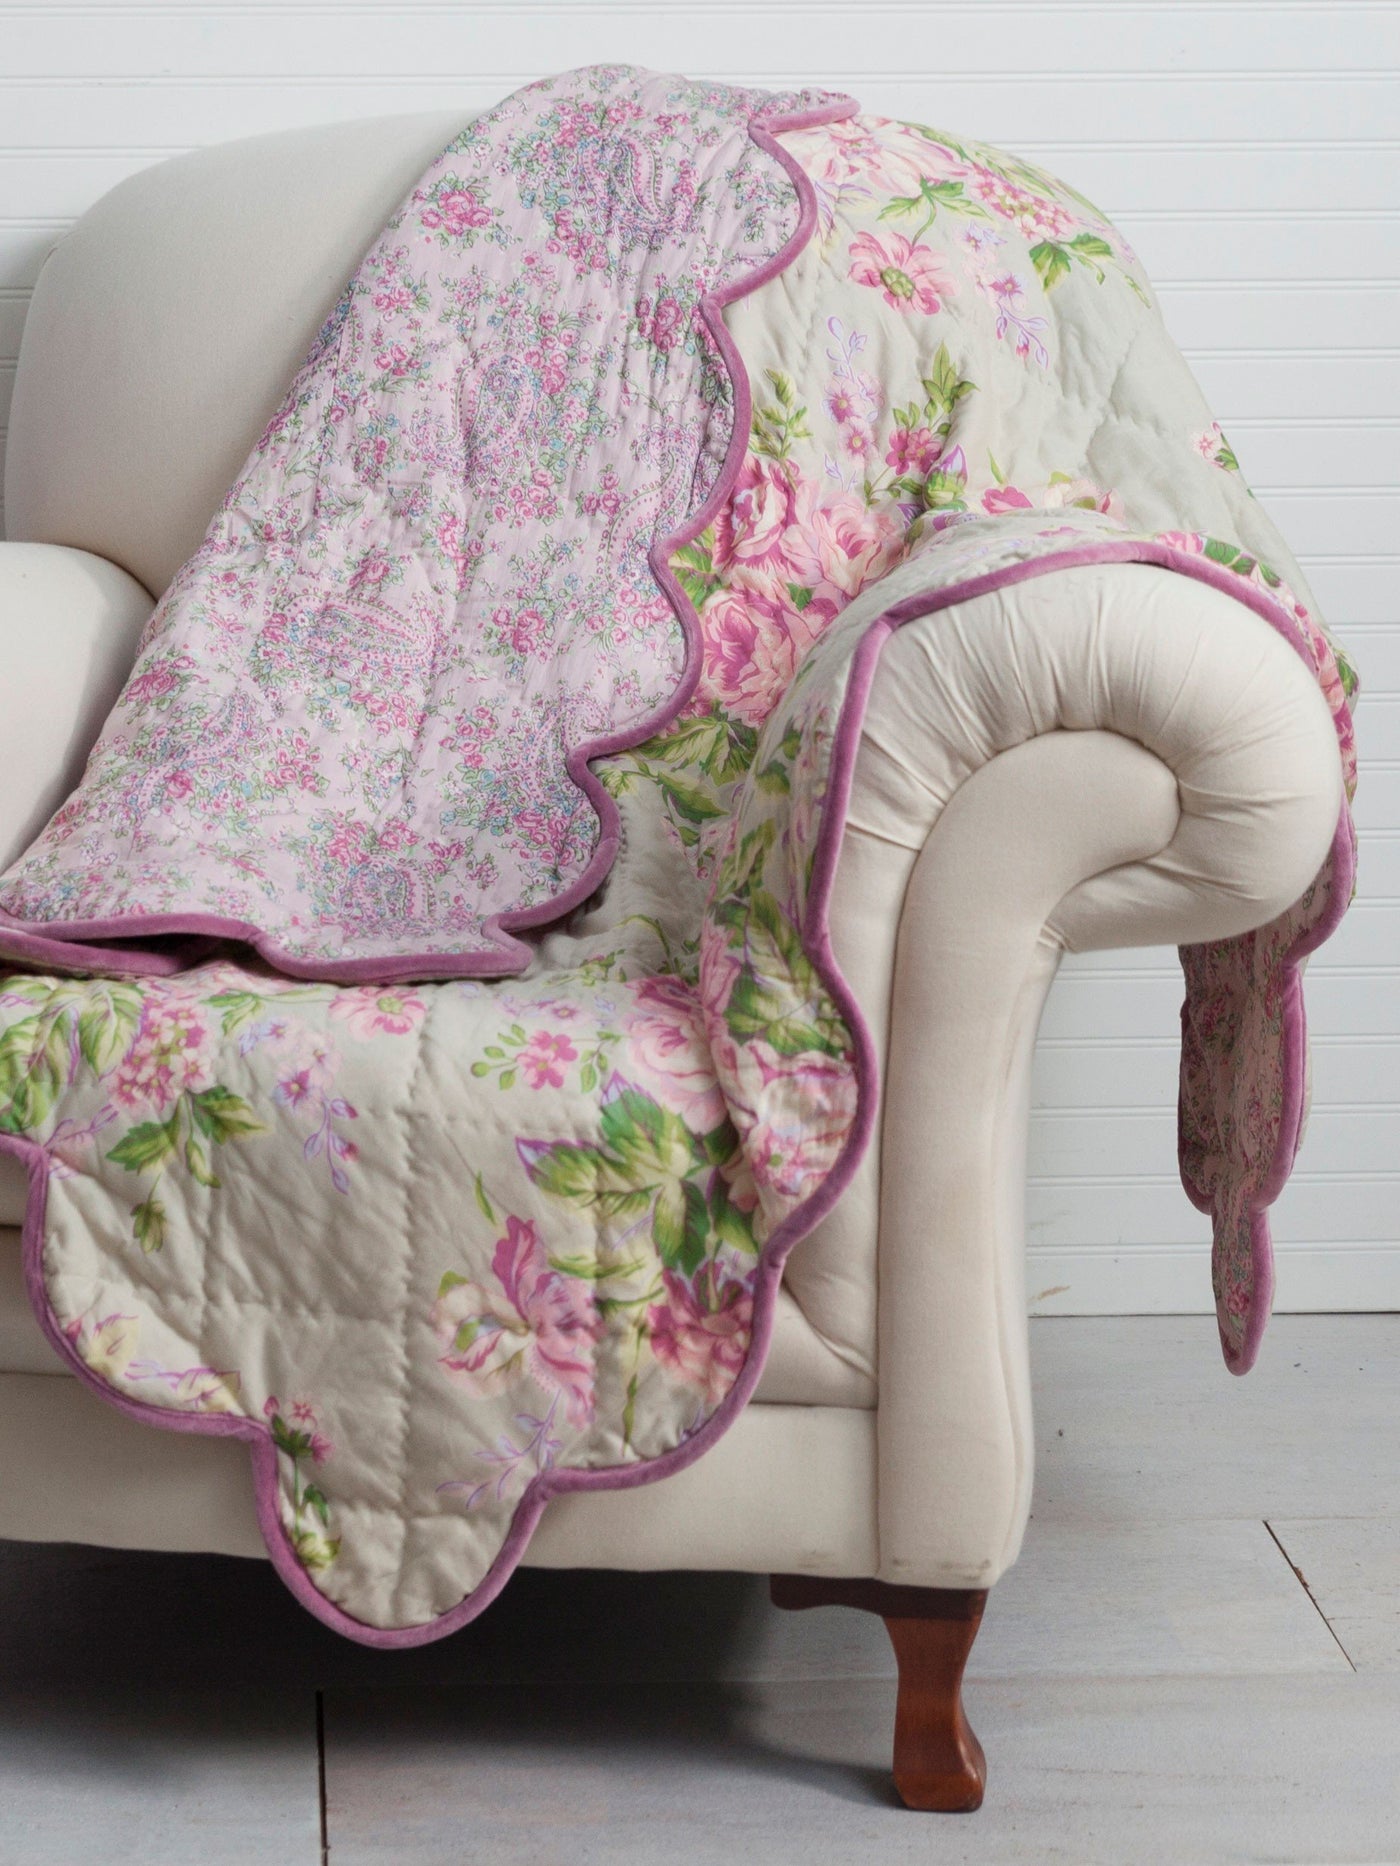 Strawberry Shortcake Throw in Sage | April Cornell- SOLD OUT